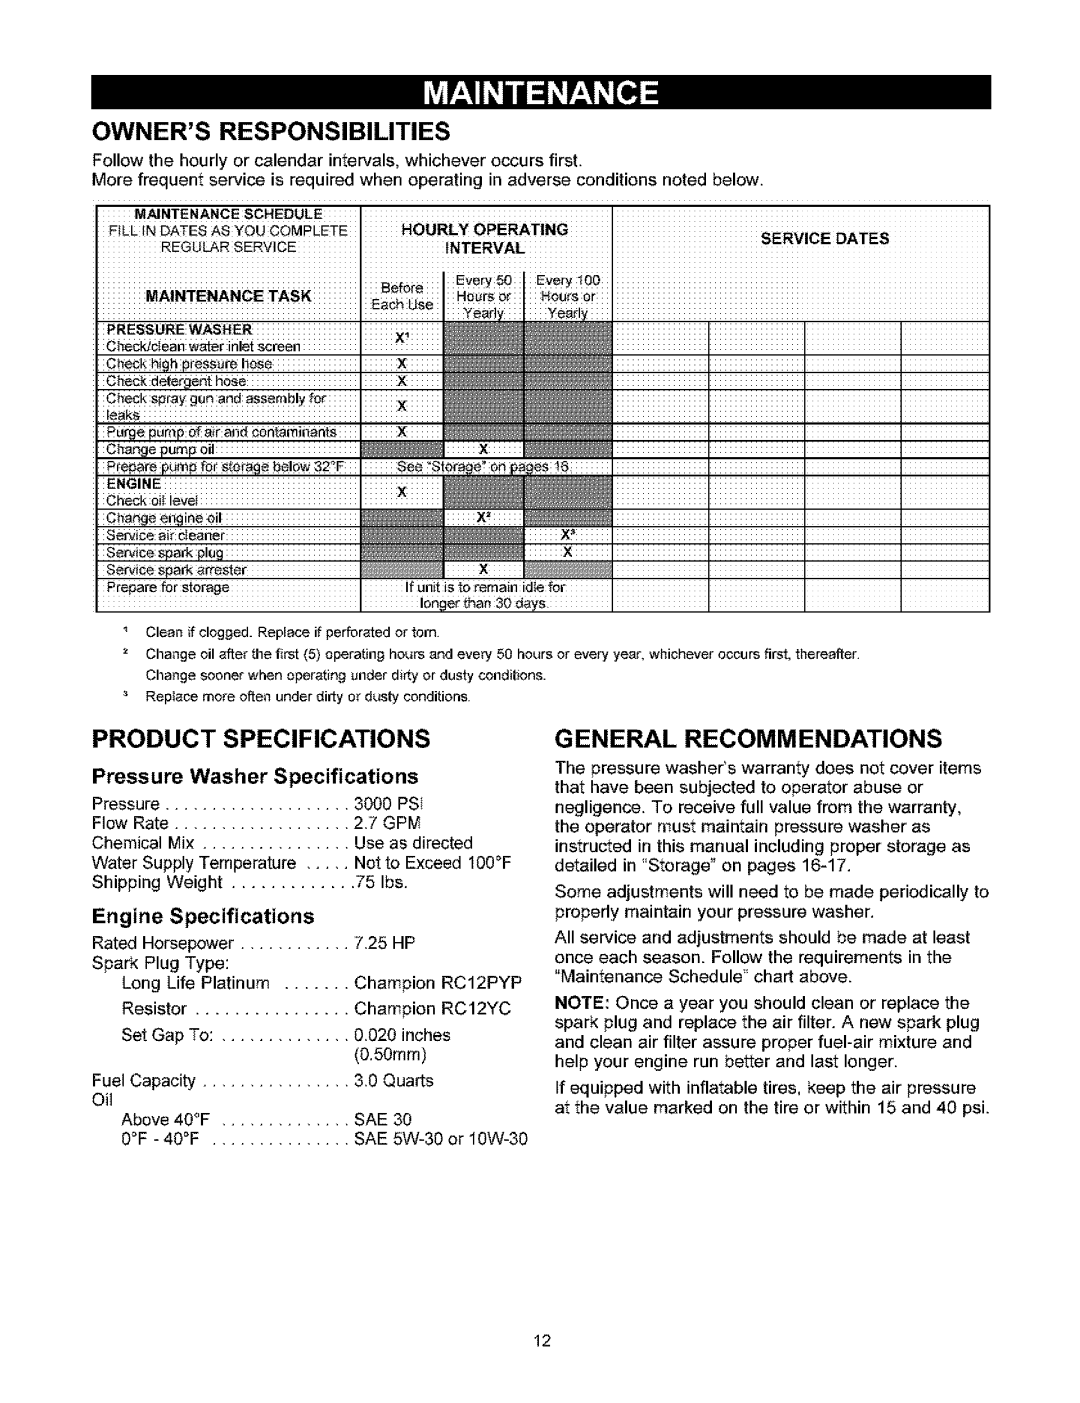 Craftsman 580.753 Owners Responsibilities, Product, General Recommendations, Washer Specifications, Engine, Pressure 